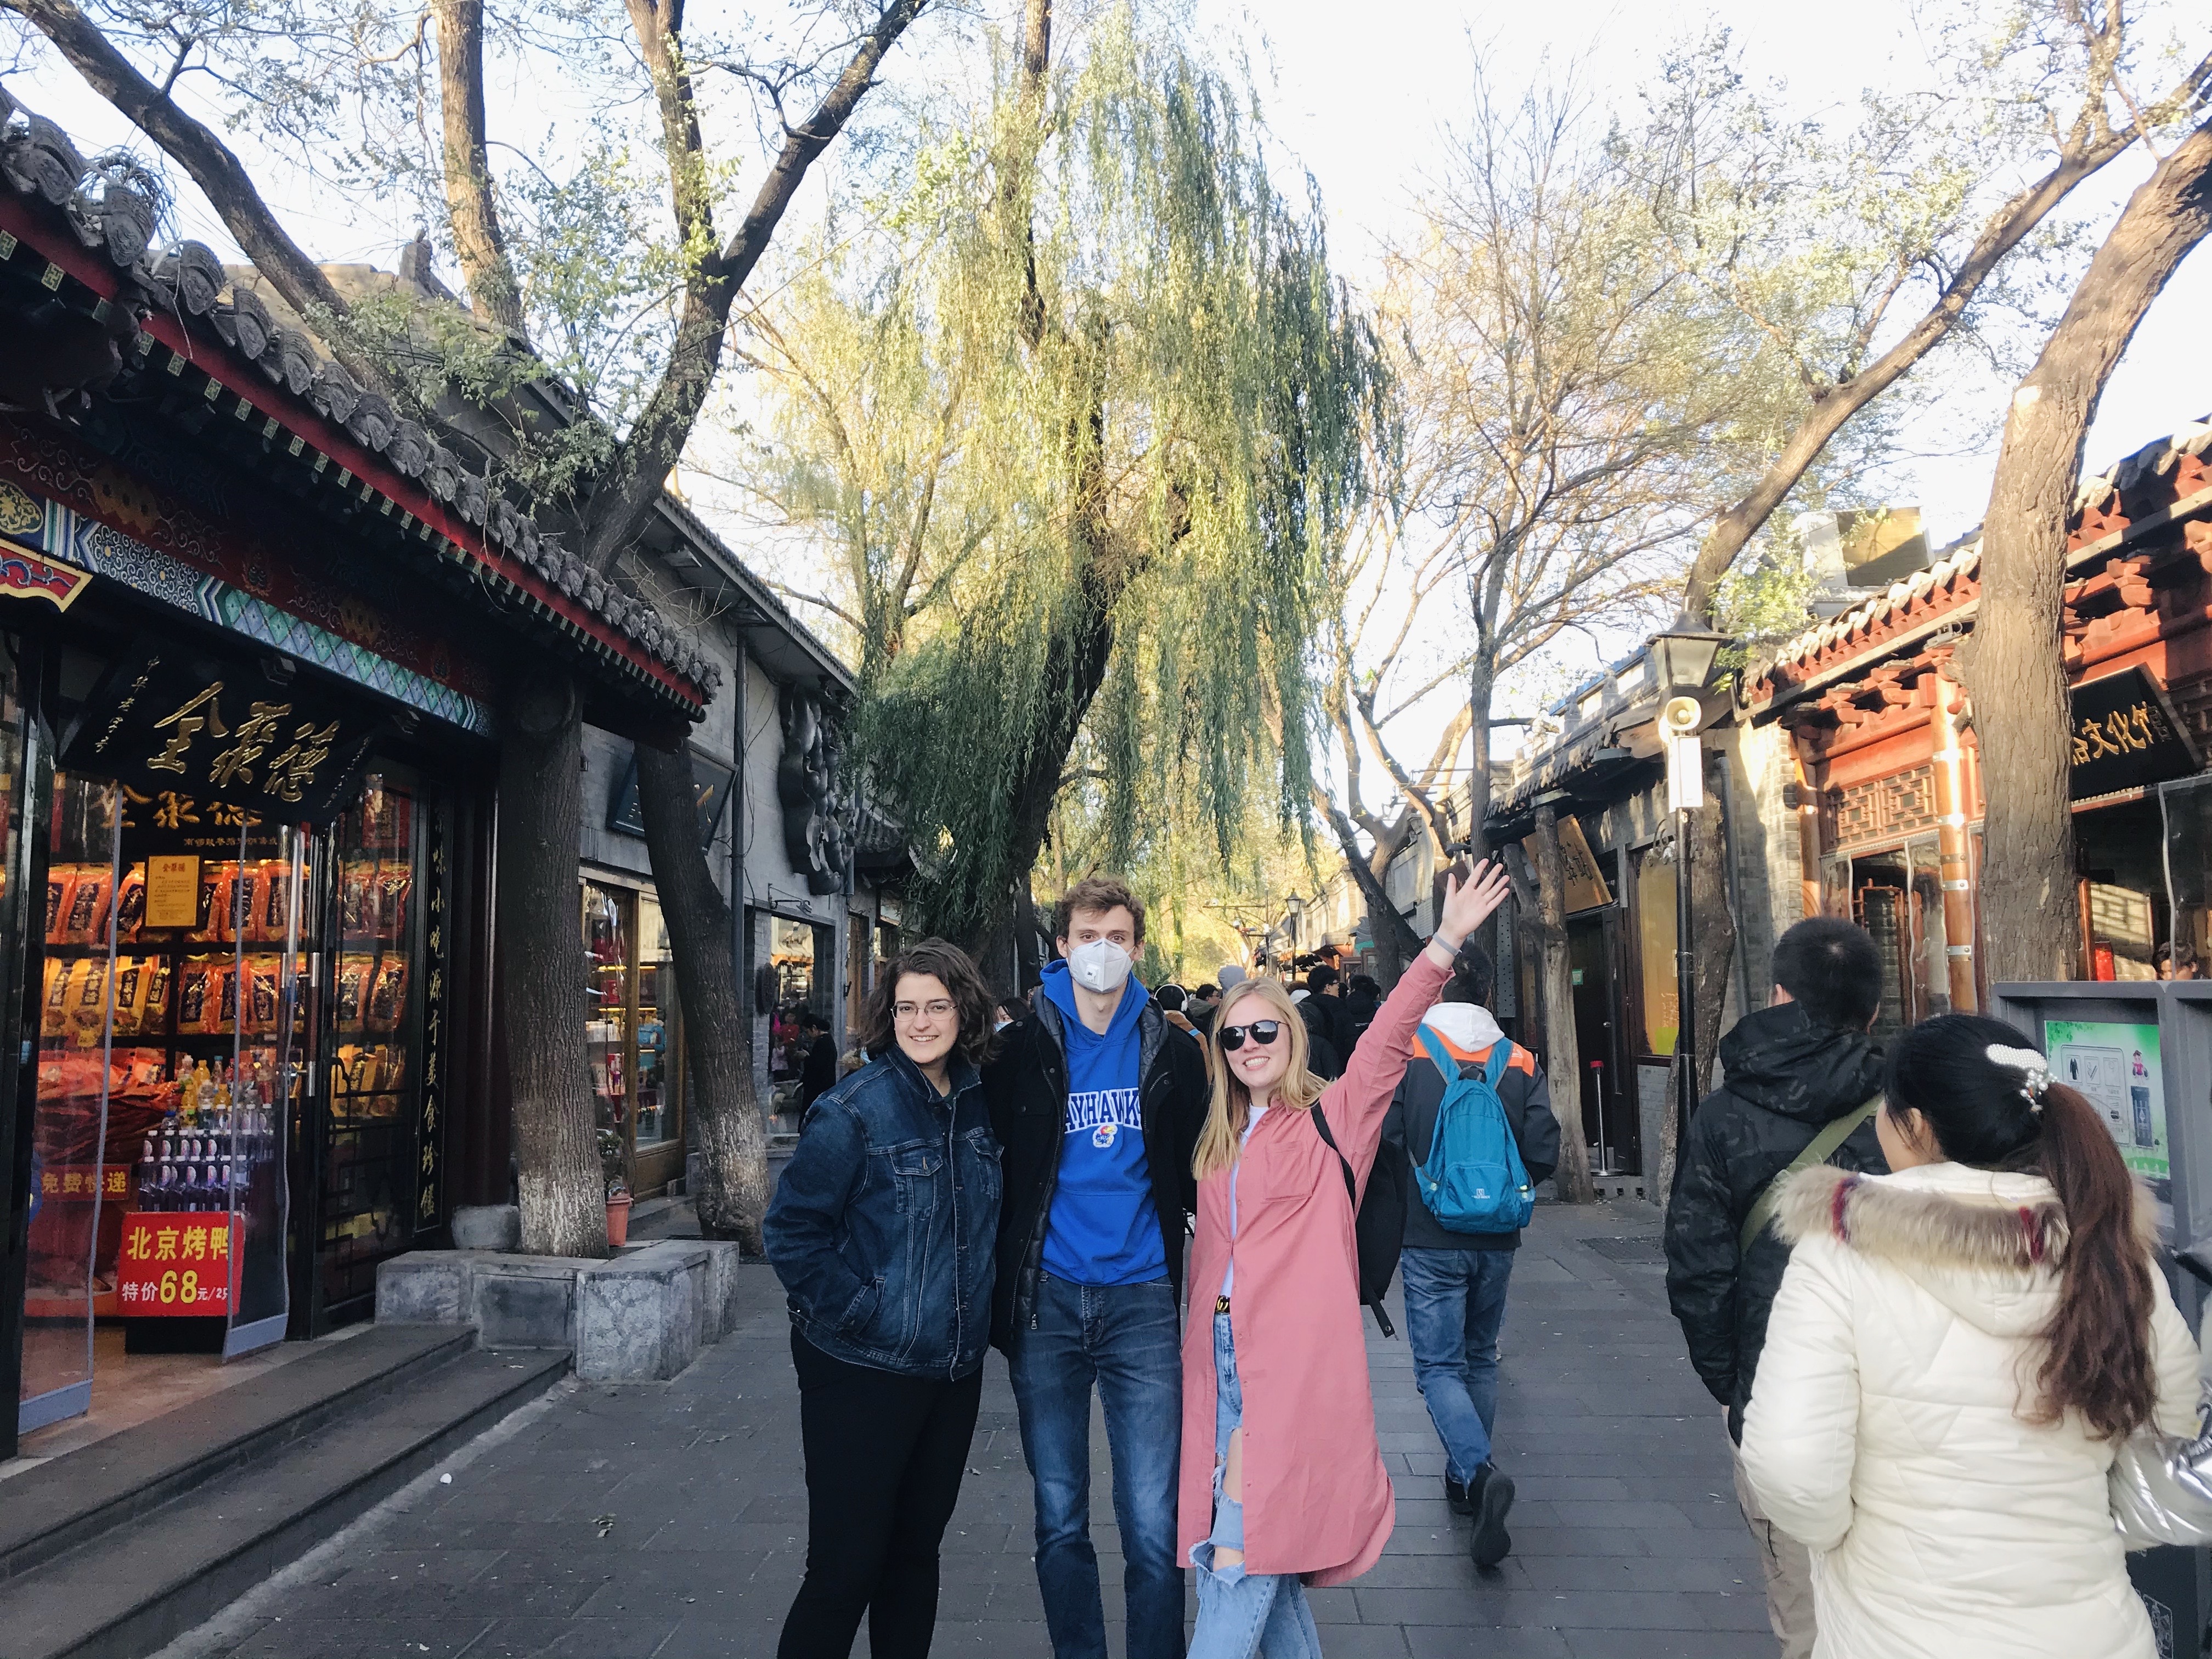 Friends posing in front of Hutong Alley